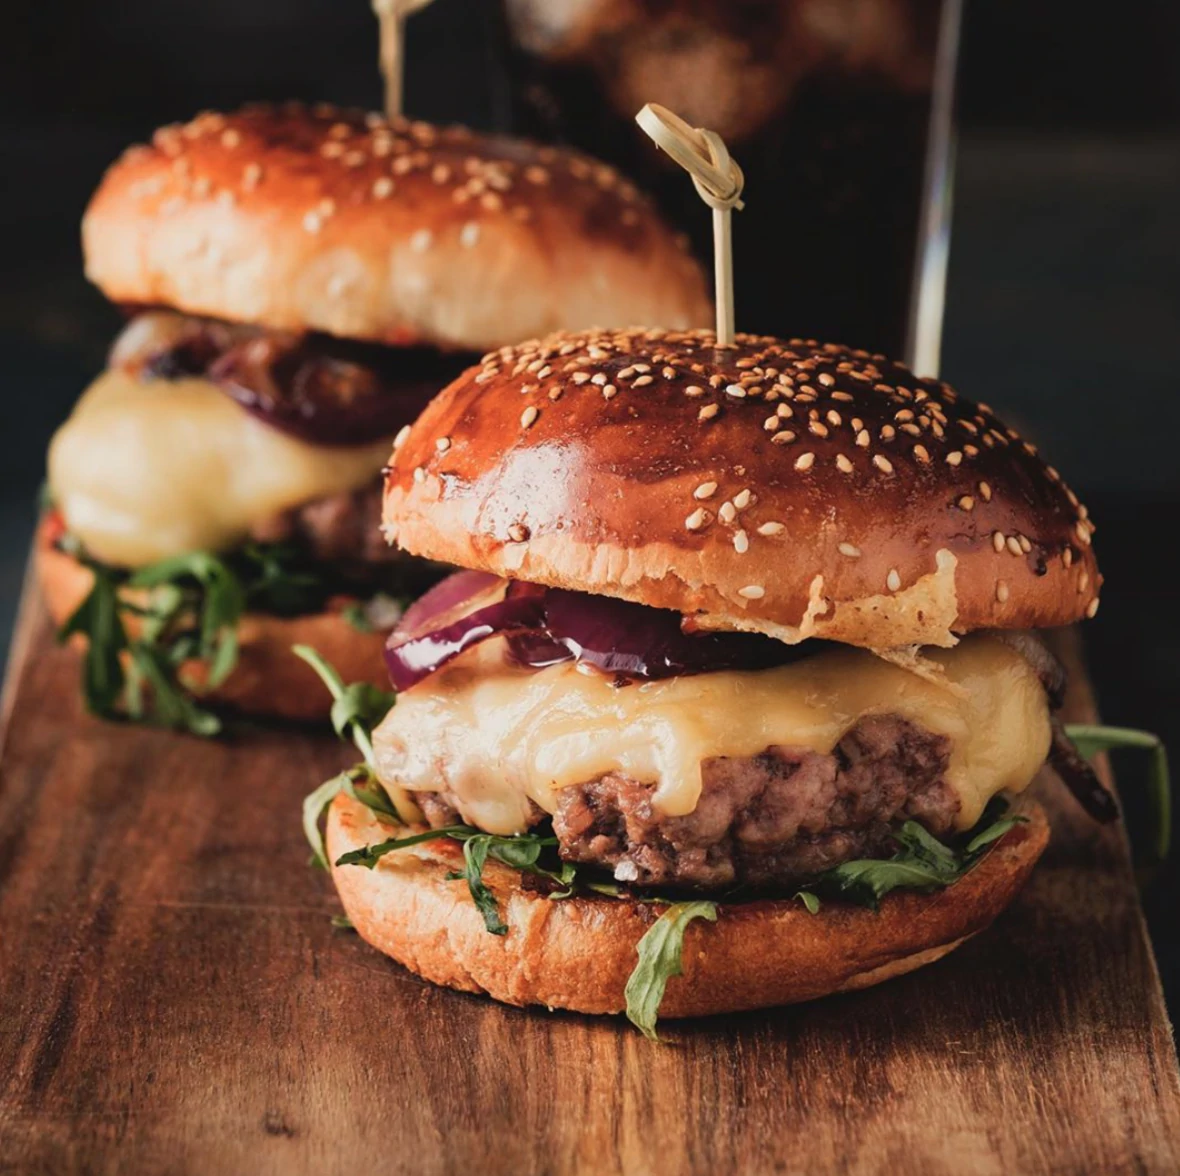 The Best Burger Grilling Tips from a Restaurant Chef